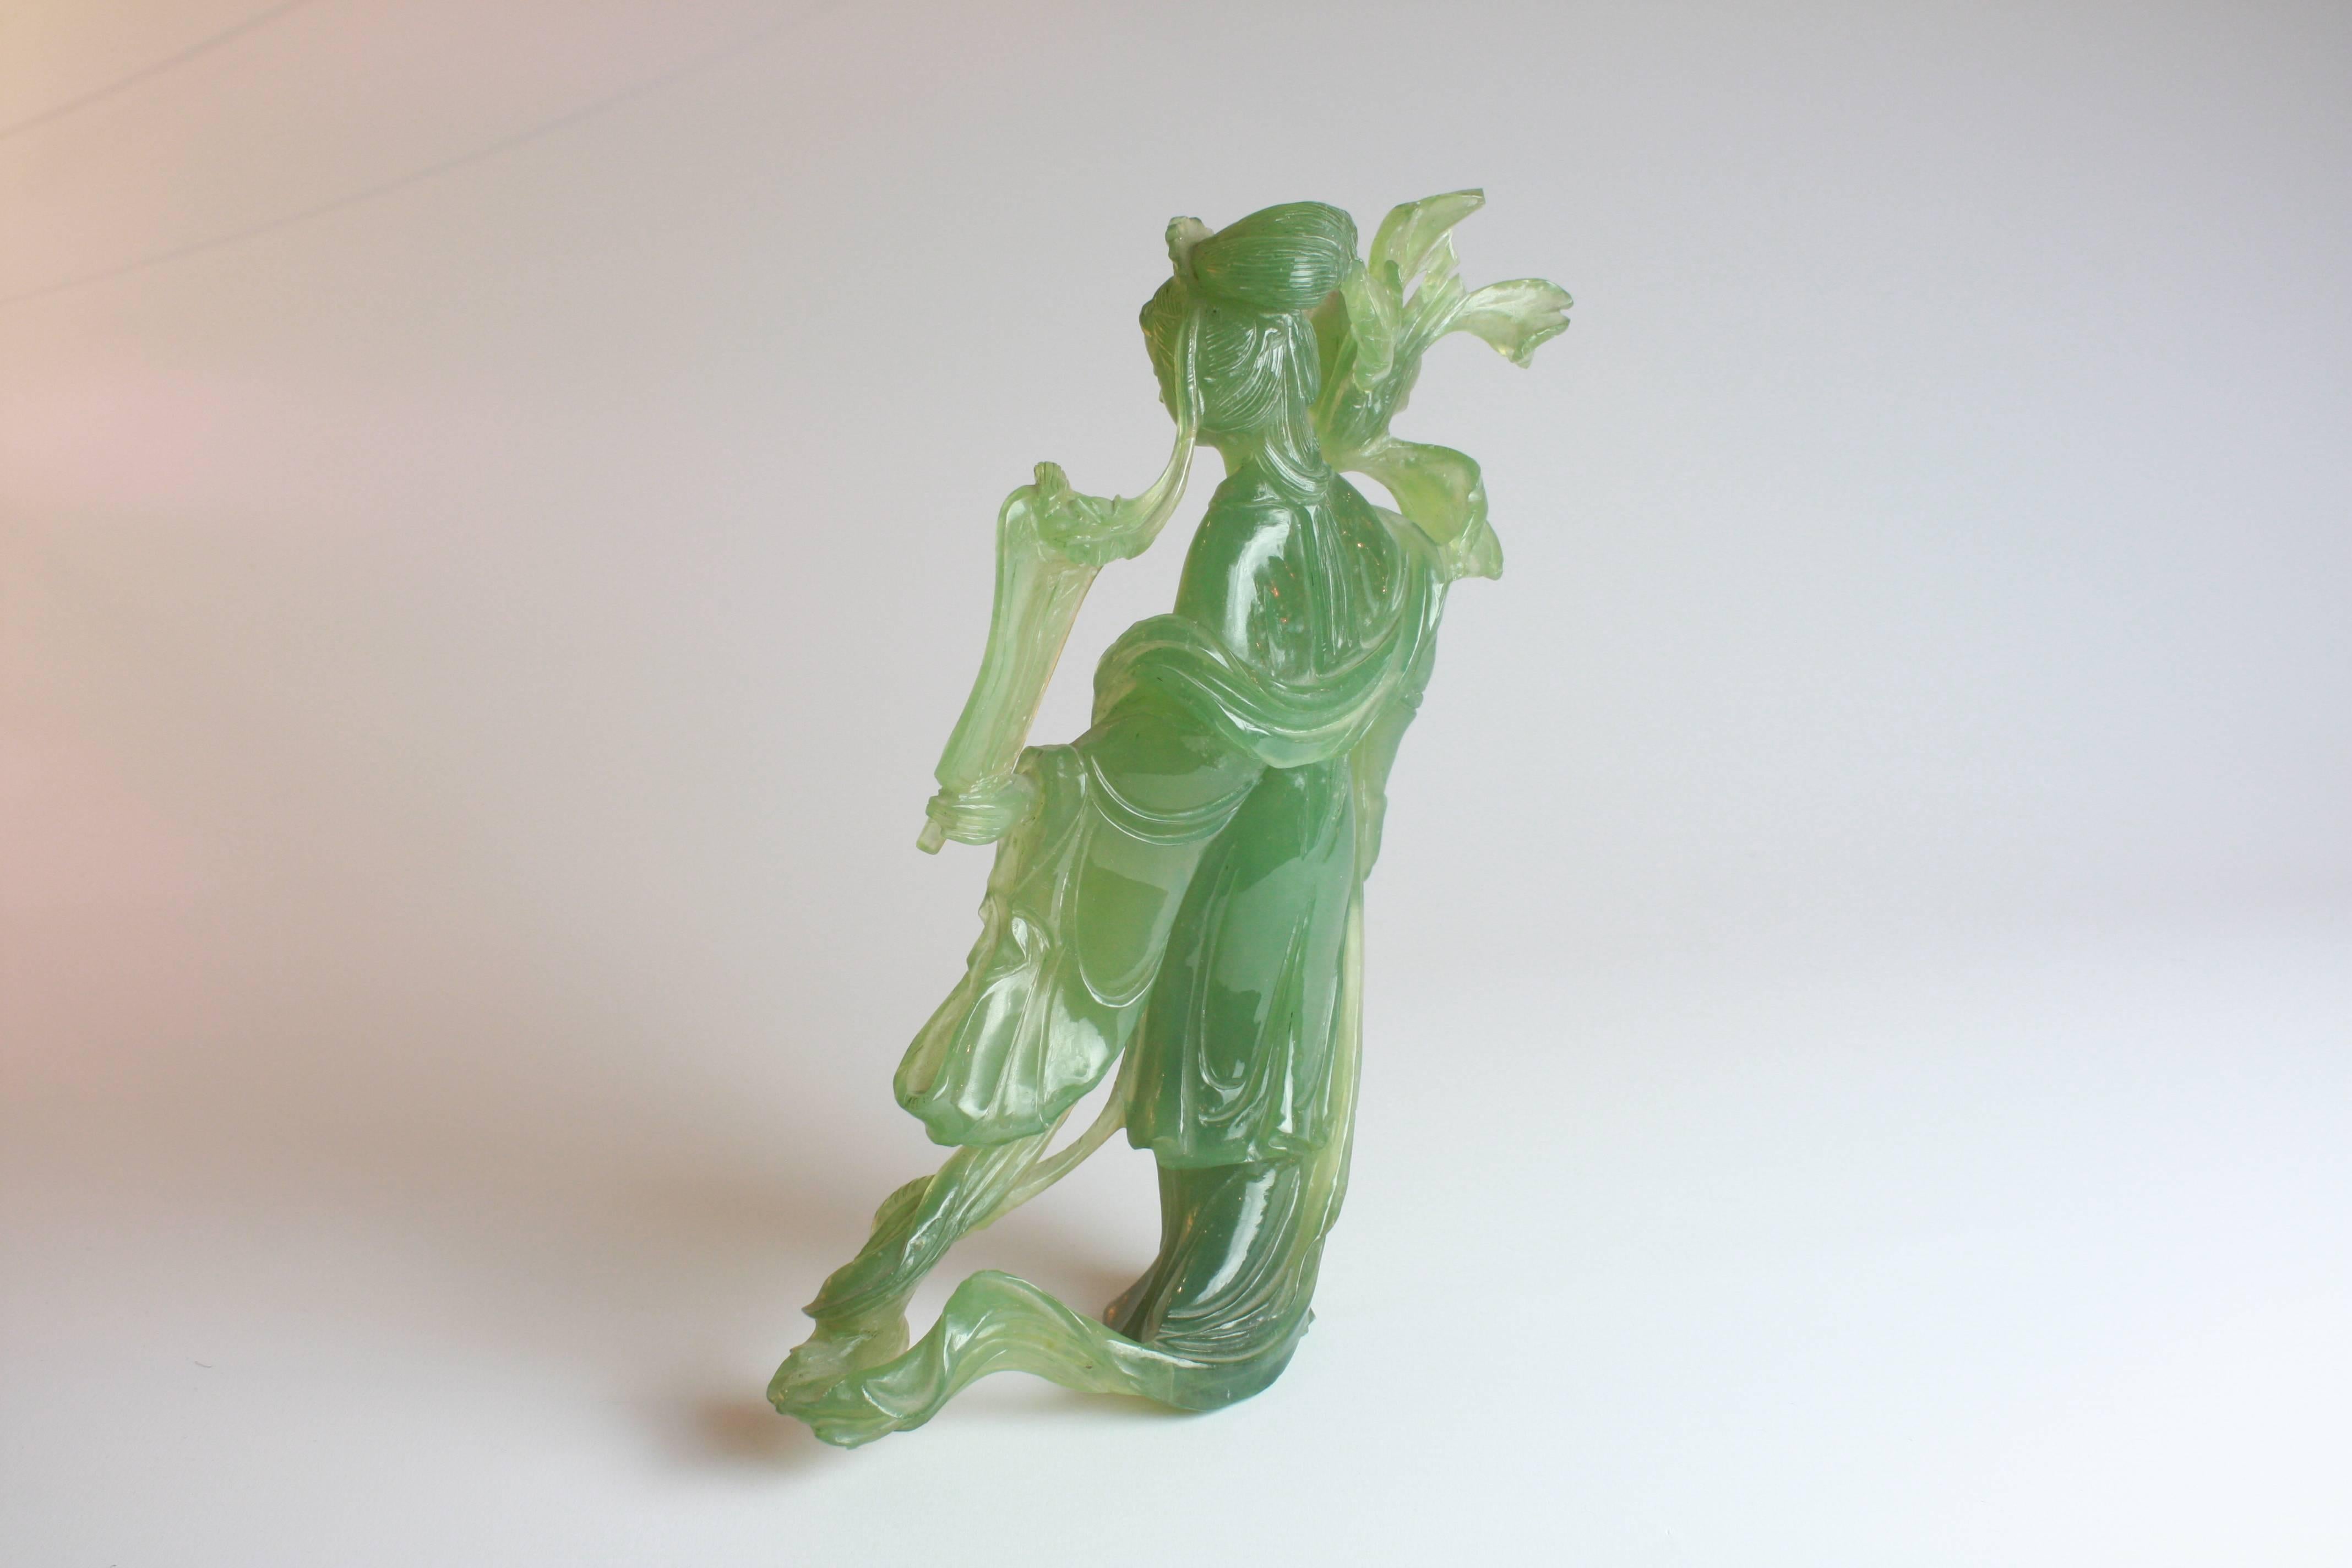 A good quality carved jade figure.
Early 20th century.

Measures: She stands 8 1/2